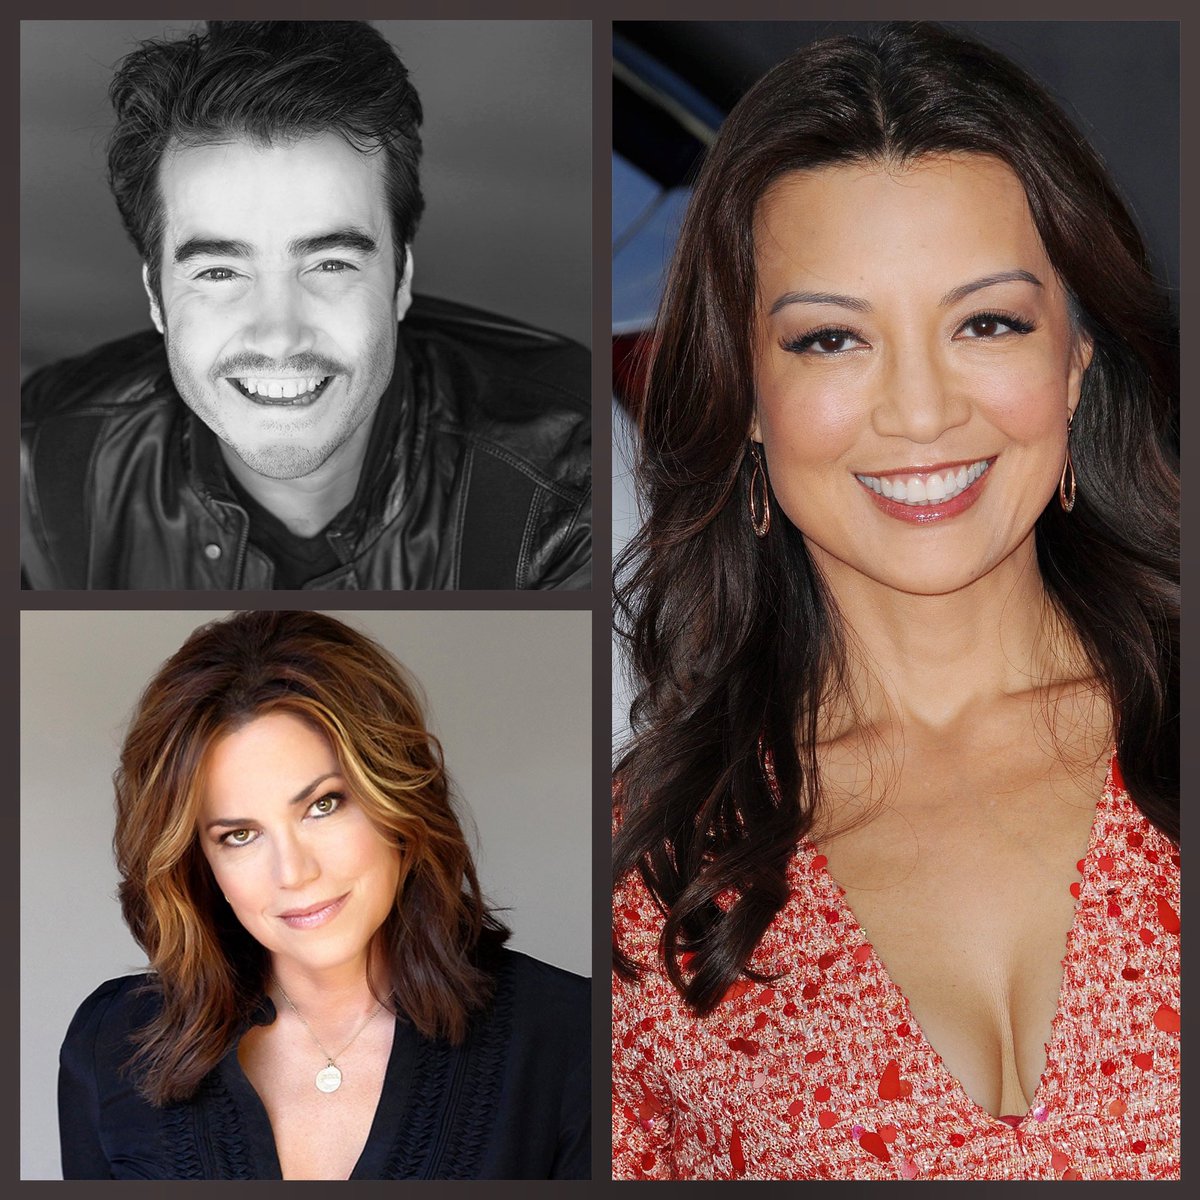 Today these three talents and former As the World Turns cast members @MingNa @welllitlife and Andrew Kavovit will join me live at 2 p.m. EST! See you this afternoon. youtube.com/watch?v=omDWUK…